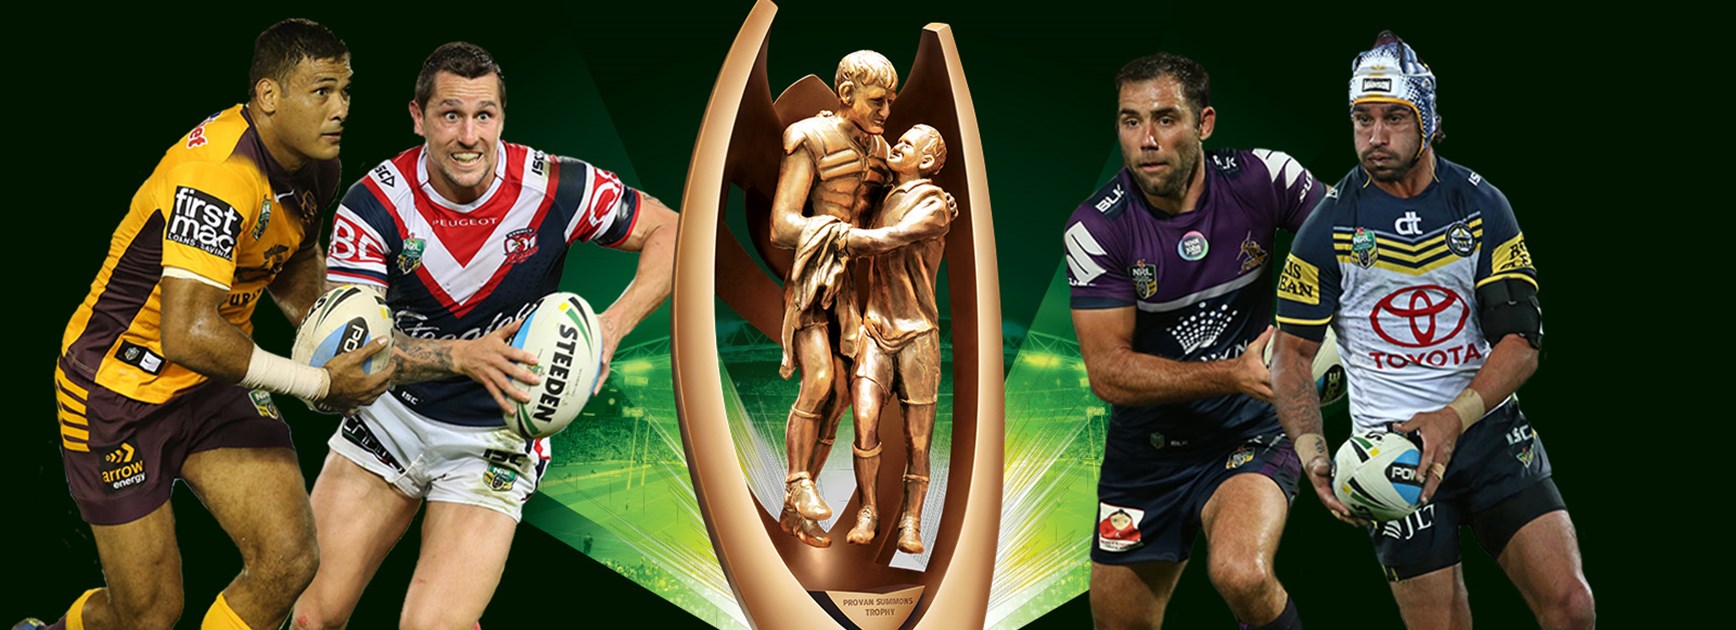 The Broncos, Roosters, Storm and Cowboys will take to the field in this weekend's preliminary finals.